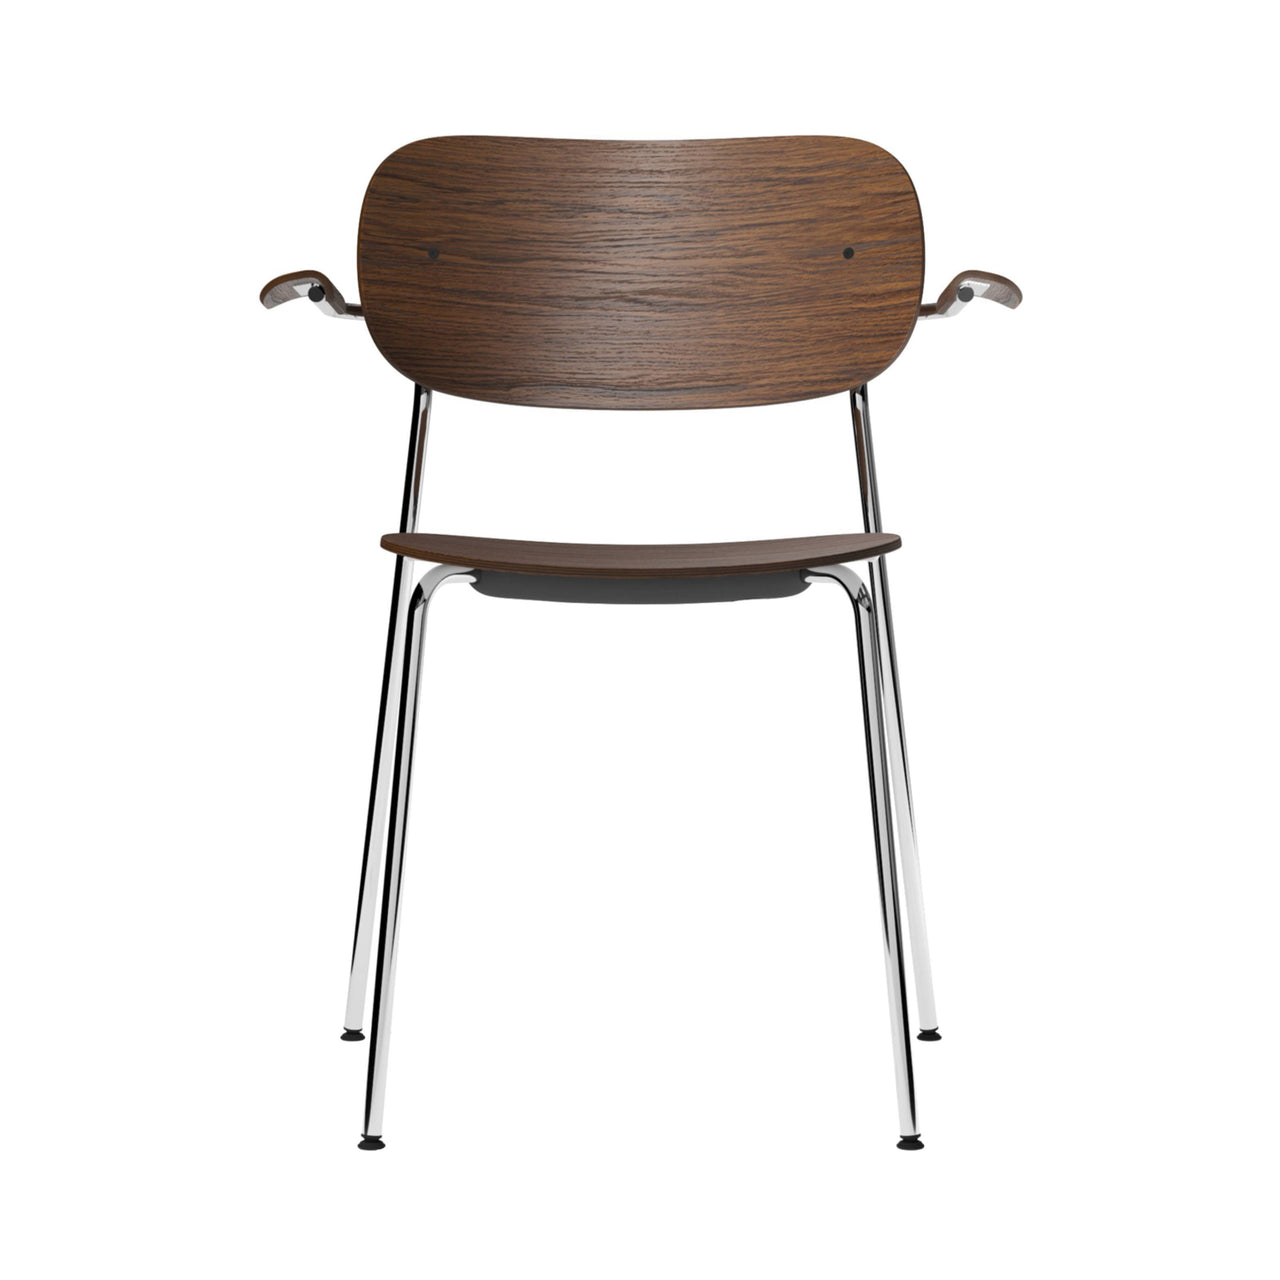 Co Chair with Armrests: Chrome + Dark Stained Oak